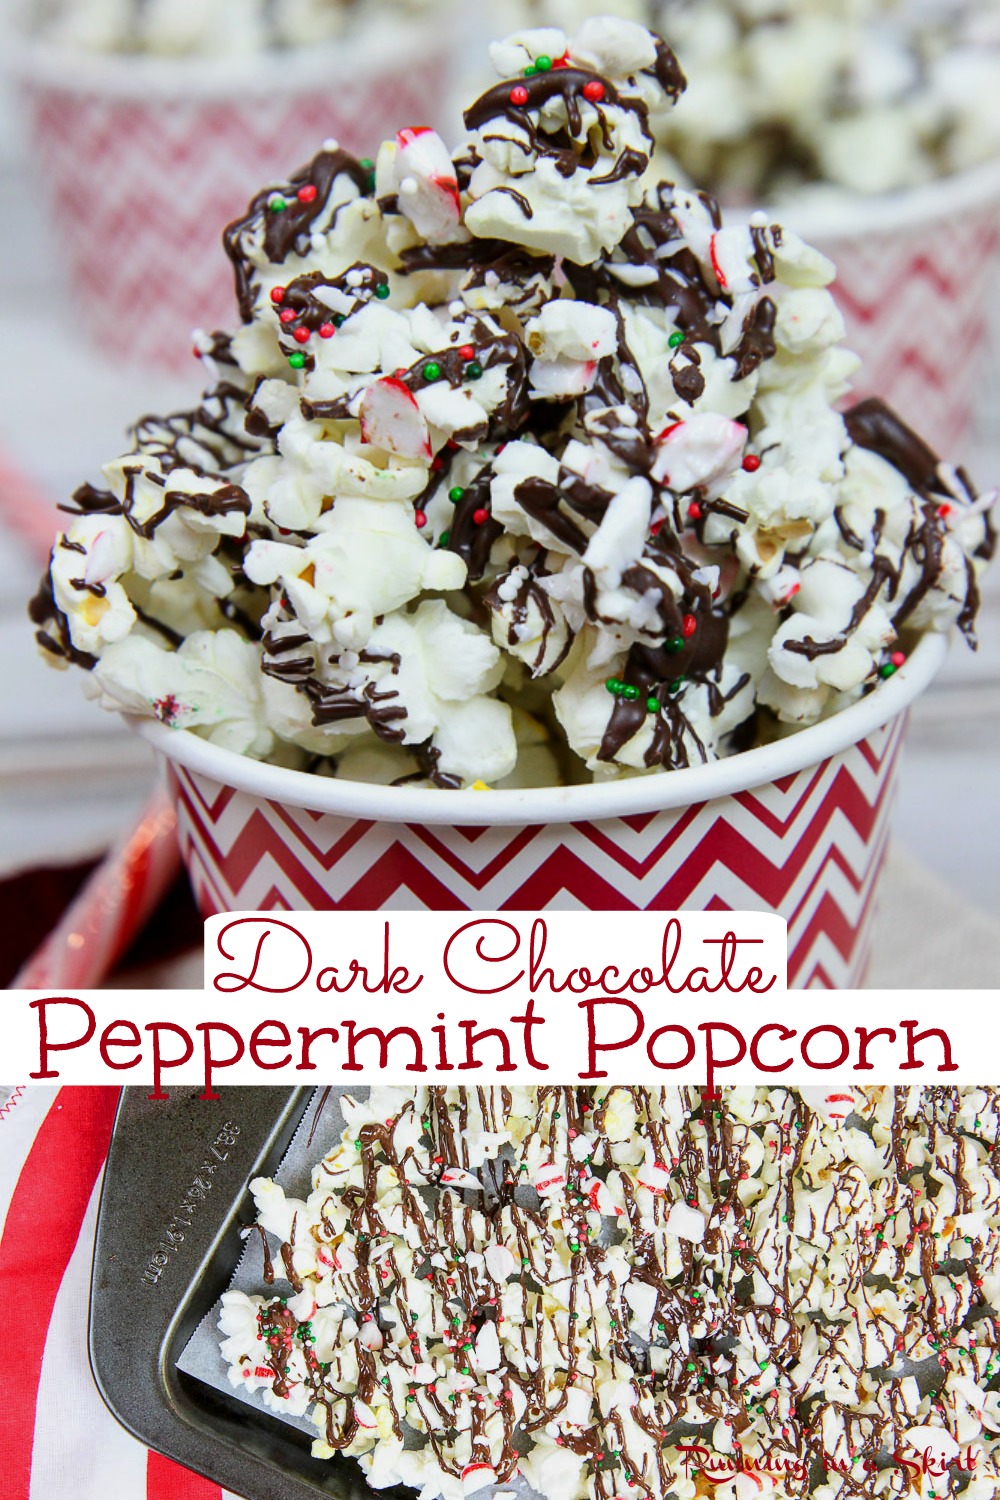 Peppermint Popcorn Recipe - The BEST Dark Chocolate Peppermint Popcorn including step by step how to make instructions. Only 4 Ingredients! Perfect for your favorite holiday or Christmas movie or a edible Christmas gift. Vegan, Vegetarian, Healthy, Gluten Free / Running in a Skirt #popcorn #christmas #healthychristmas #recipe via @juliewunder